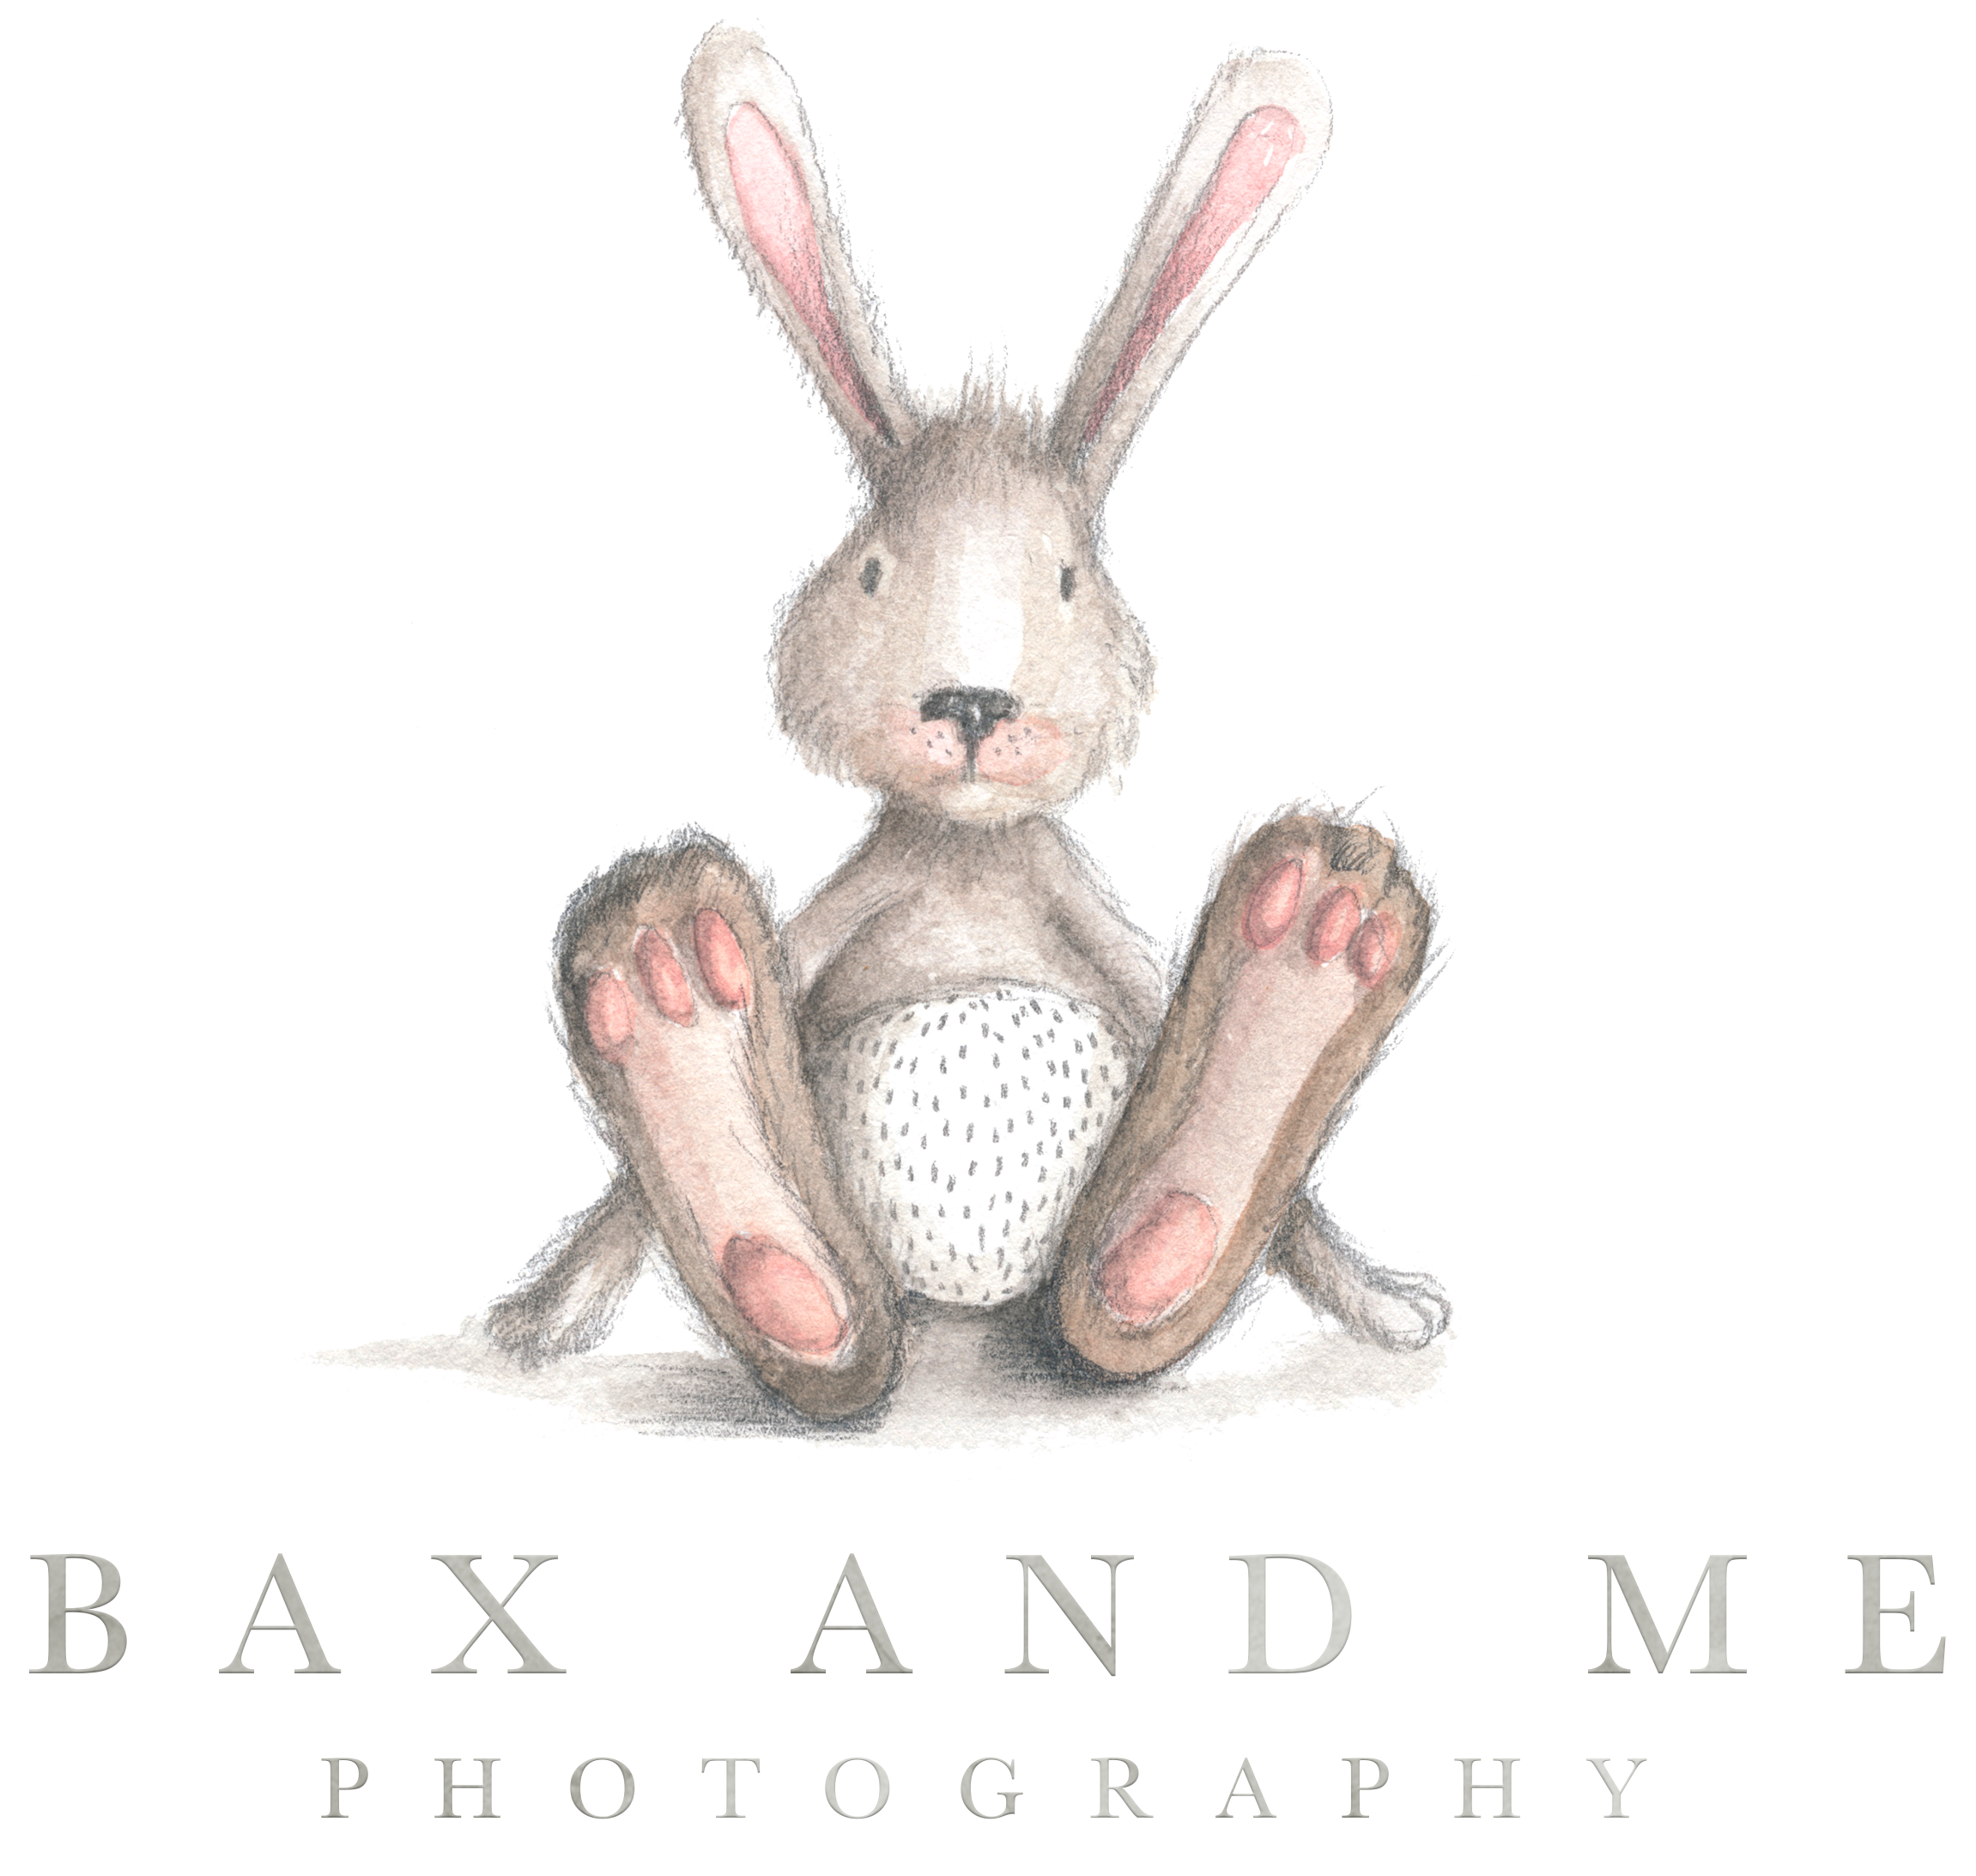 Bax and Me Photography